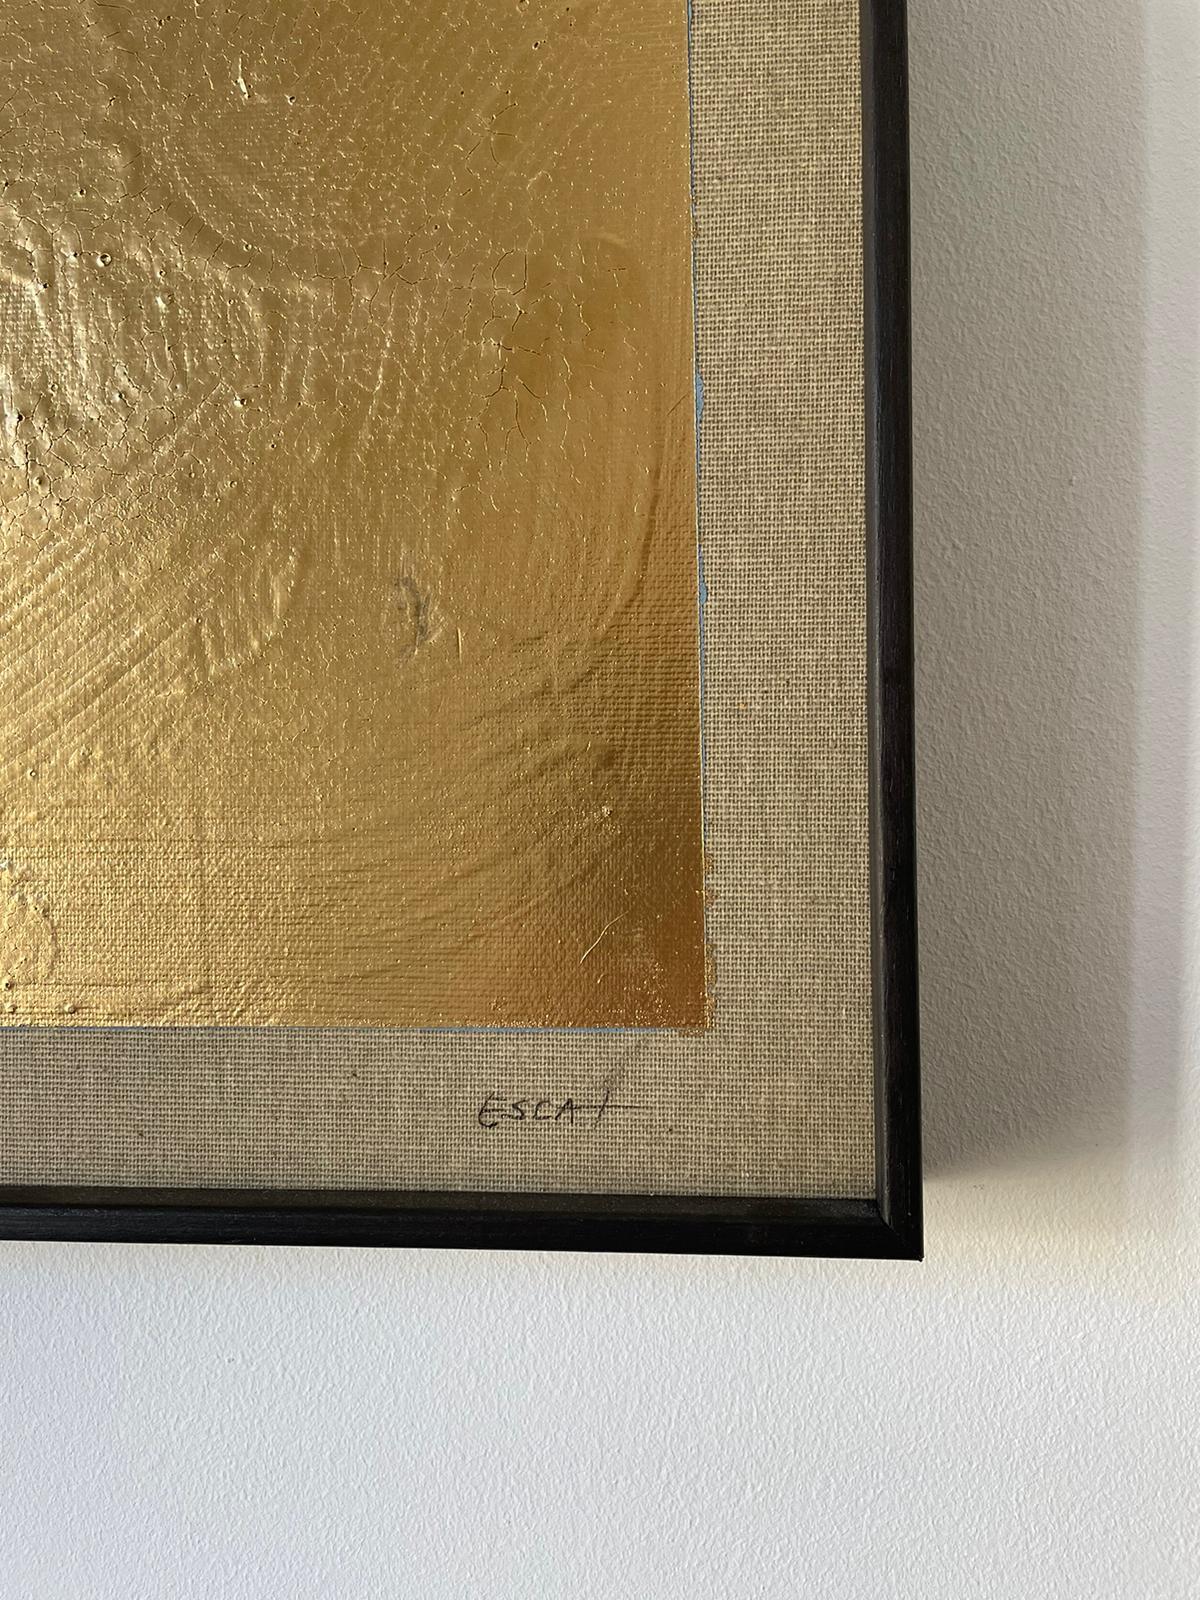 ABSTRACT Artwork Acrylic with gold color Untitled by Pau Escat 2023 For Sale 2